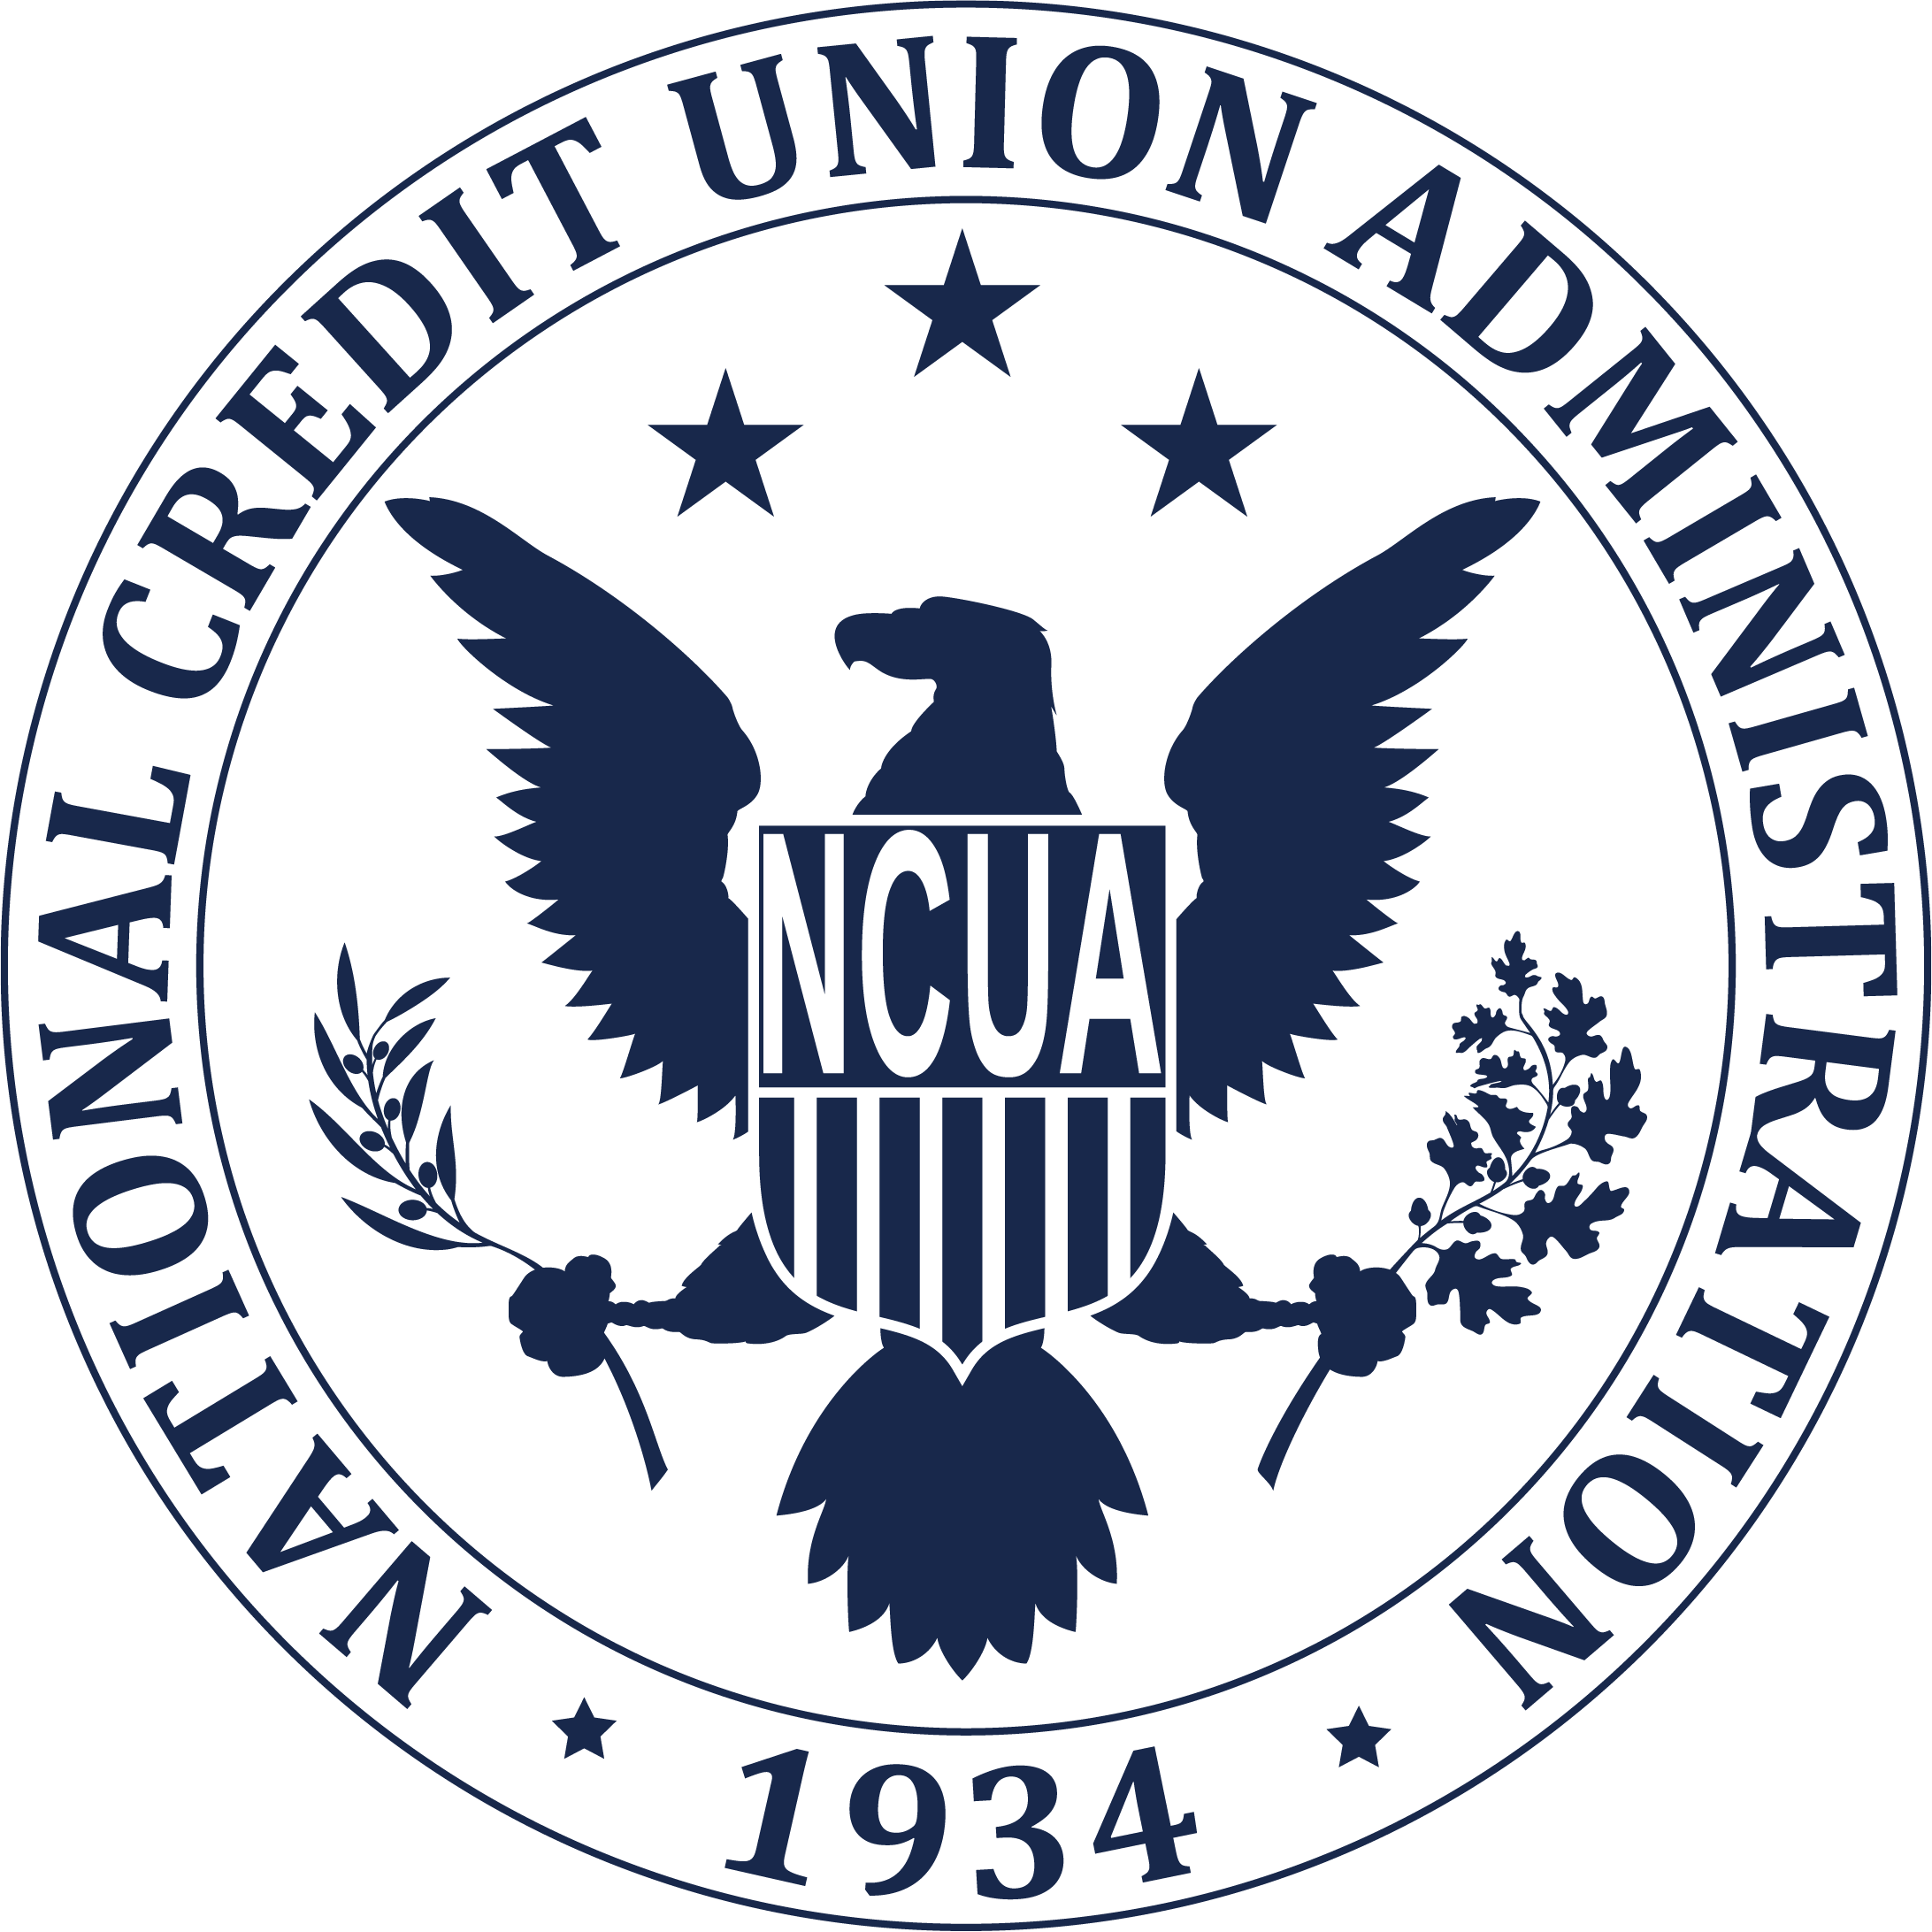 National Credit Union agency seal